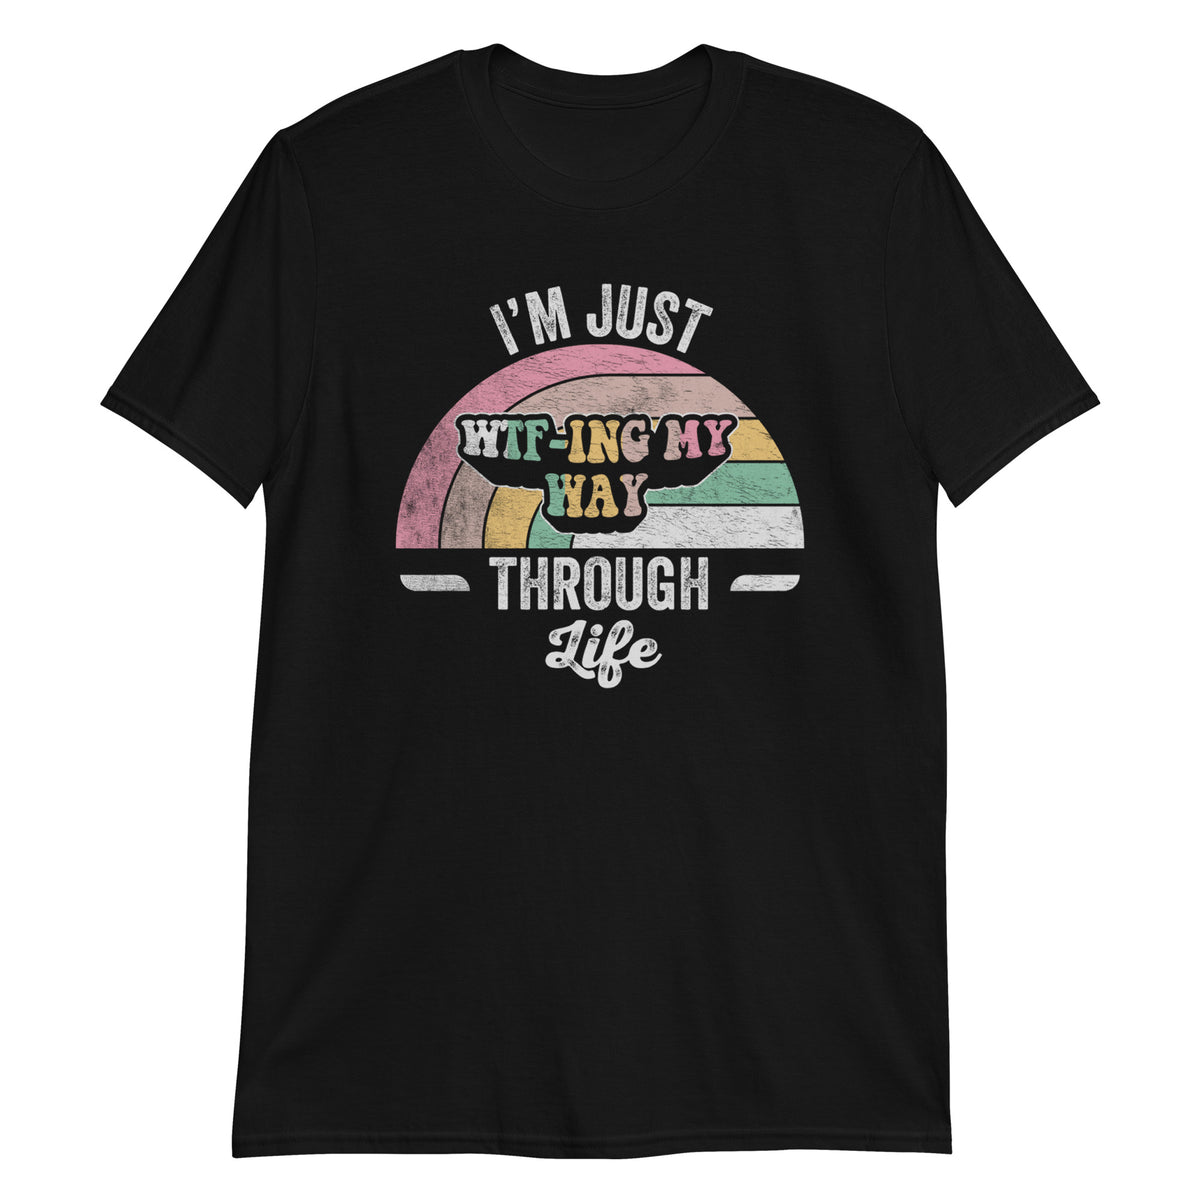 I'm Just WTFing My Way Through Life Funny Saying Sarcastic Retro Vintage T-Shirt